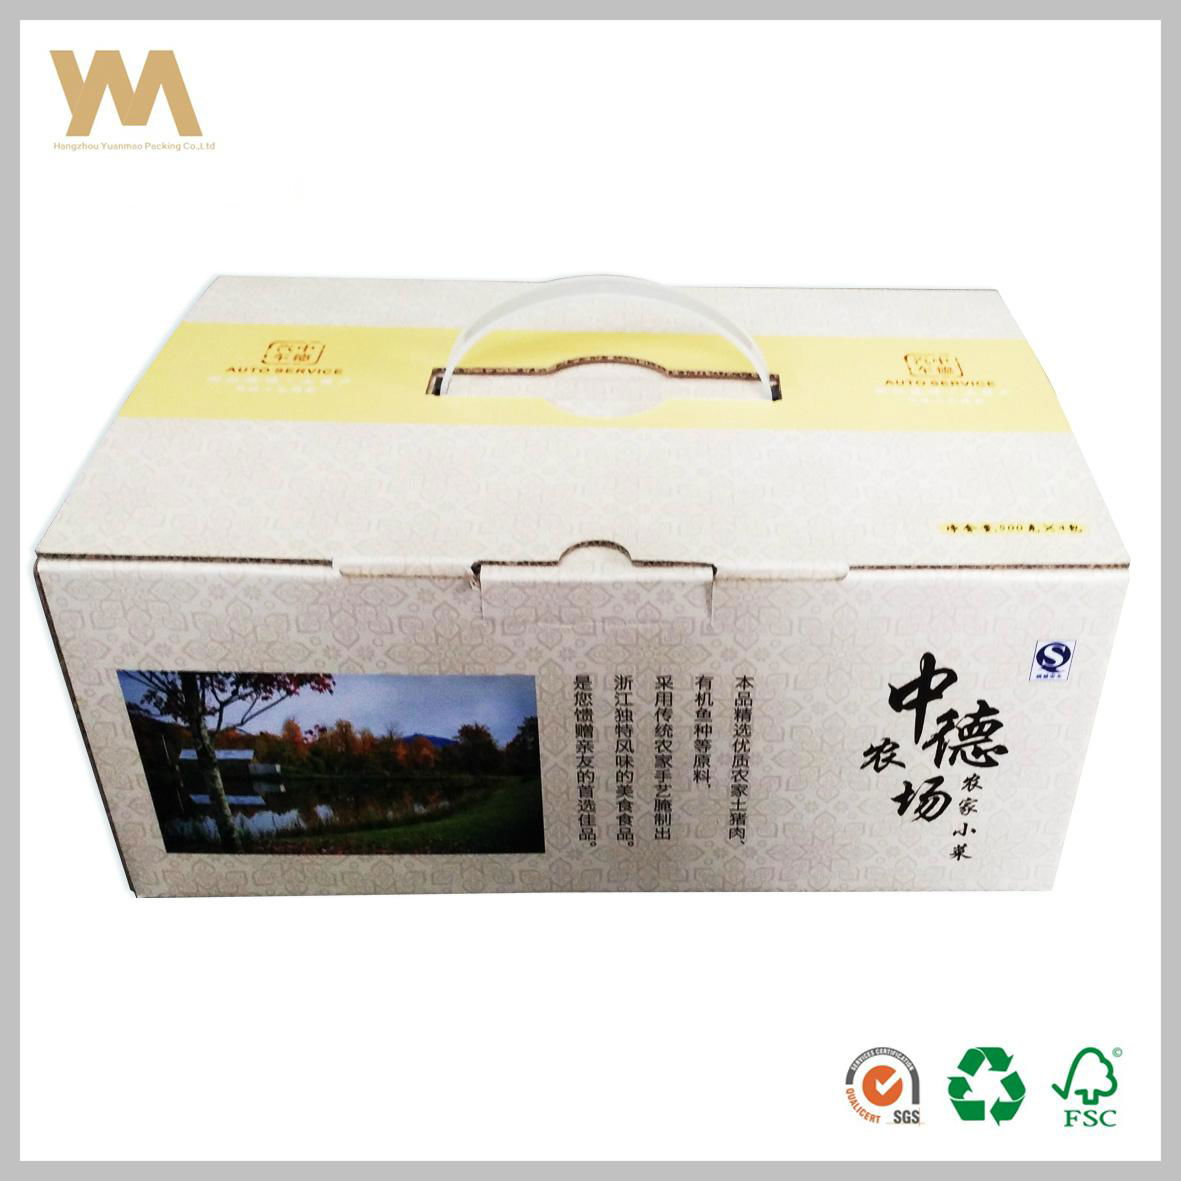 Accept Custom Order Corrugated Box for Food